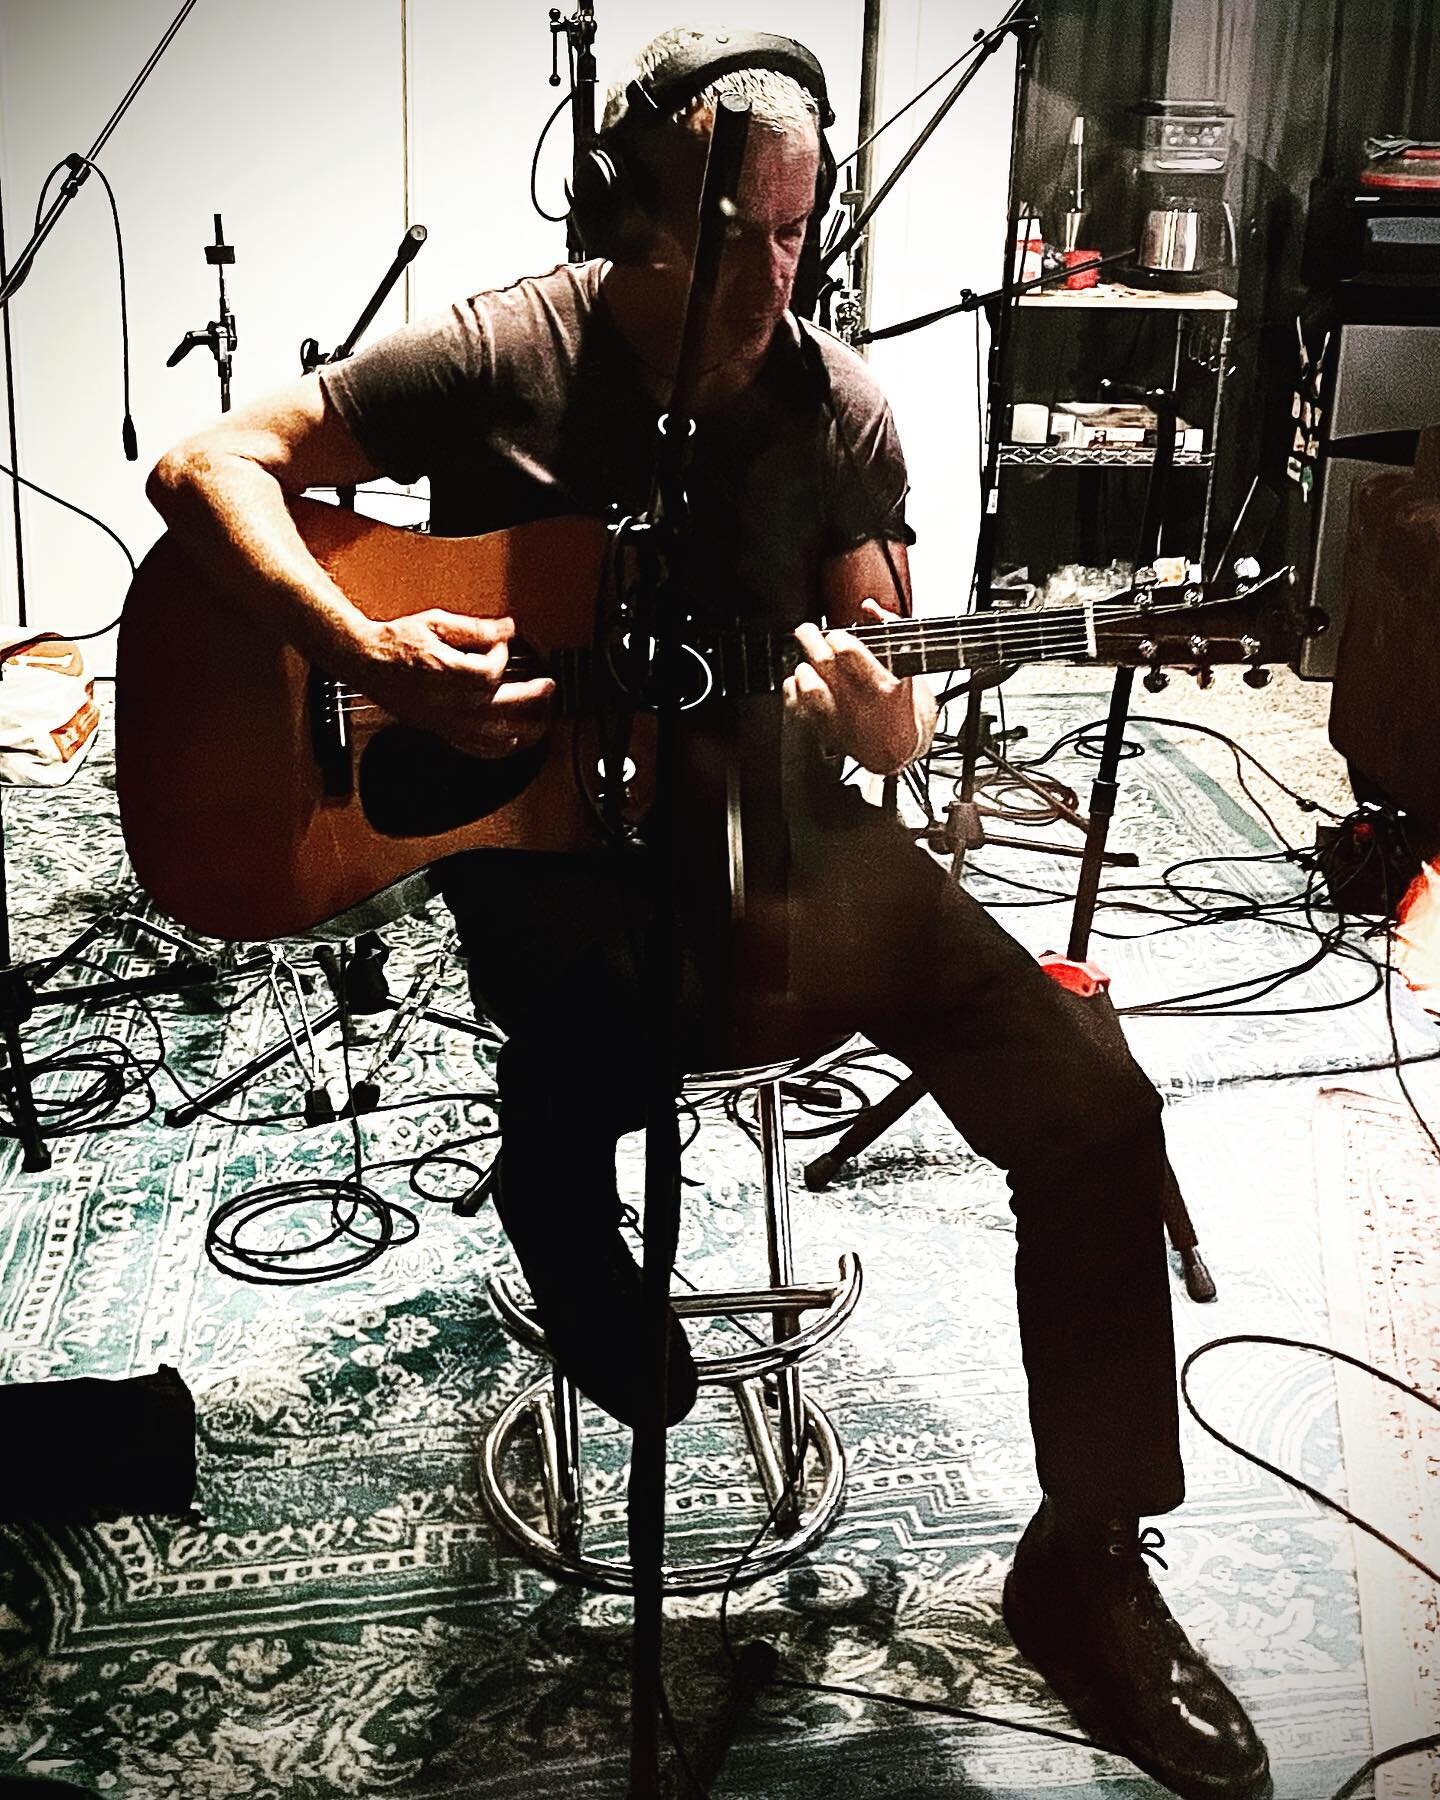 &ldquo;All the correct fingers are on the correct string&rdquo;. Day 3 tracking for &lsquo;Window to the World&rsquo; in the can.  The &lsquo;Why Not Sessions&rsquo;. Had time to track some acoustic guitars.  Thanks @toddherfindalmusic .  See you in 